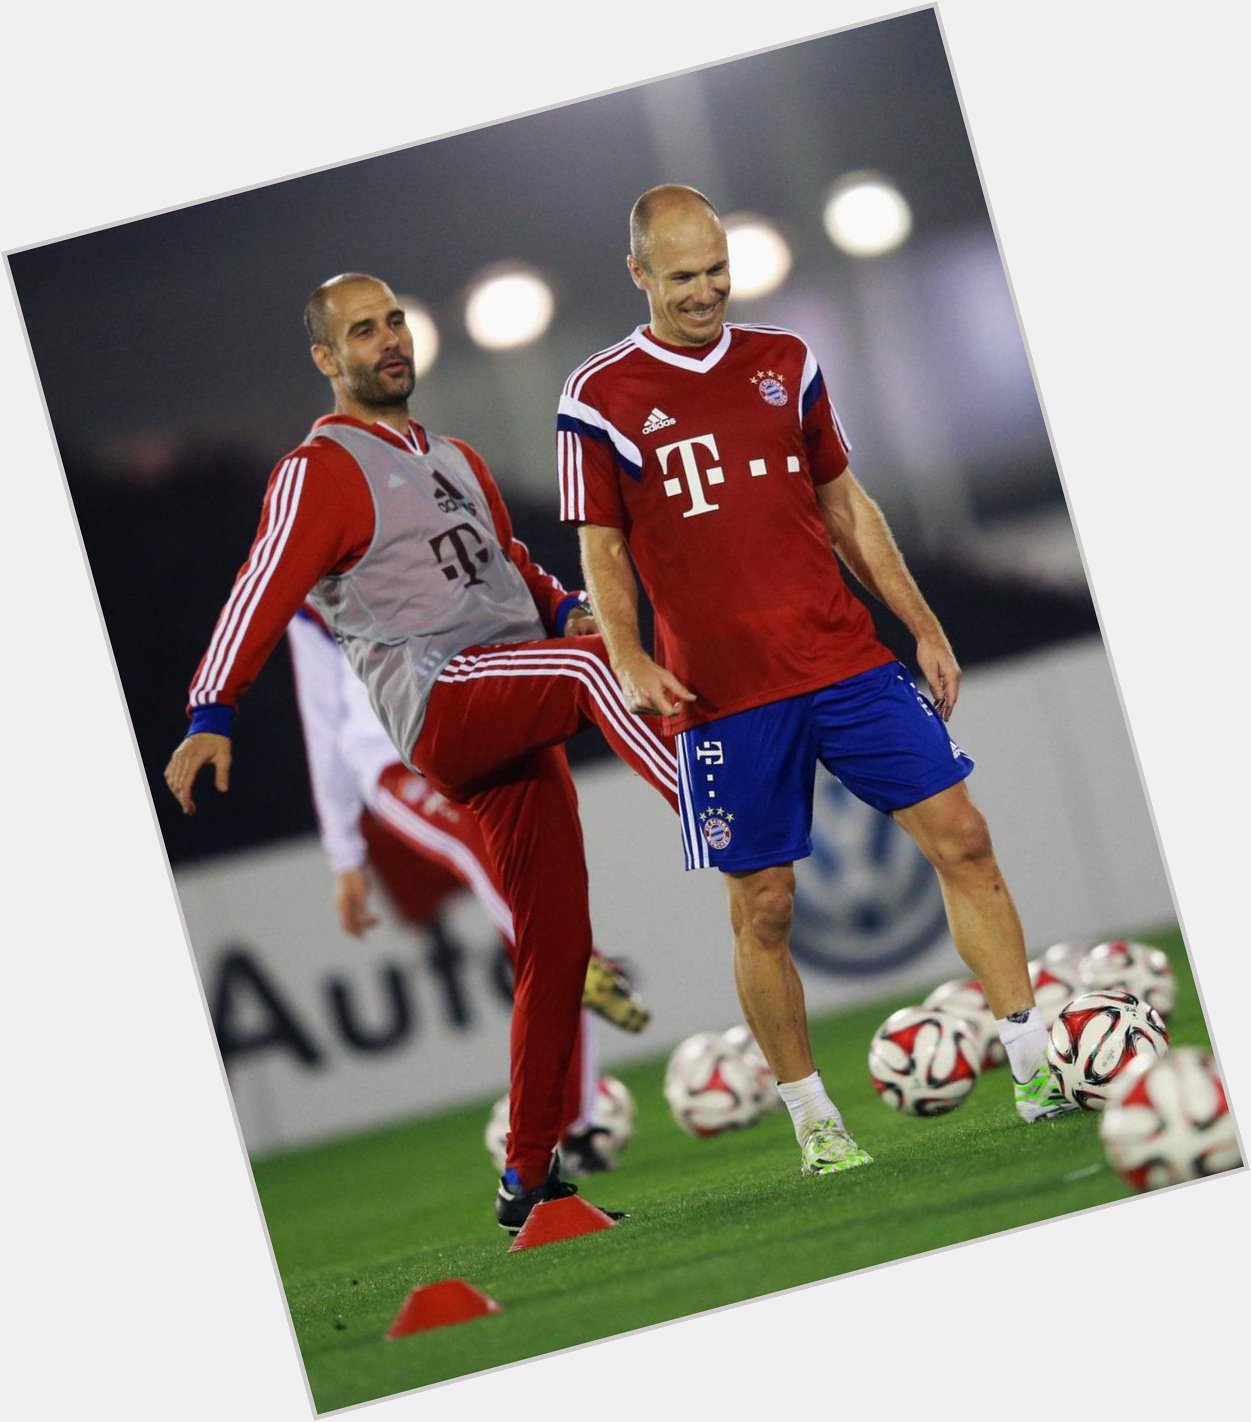 Happy Birthday to Arjen Robben who turns 31 years today | Guardiola \"Robben is a gift for me\" 